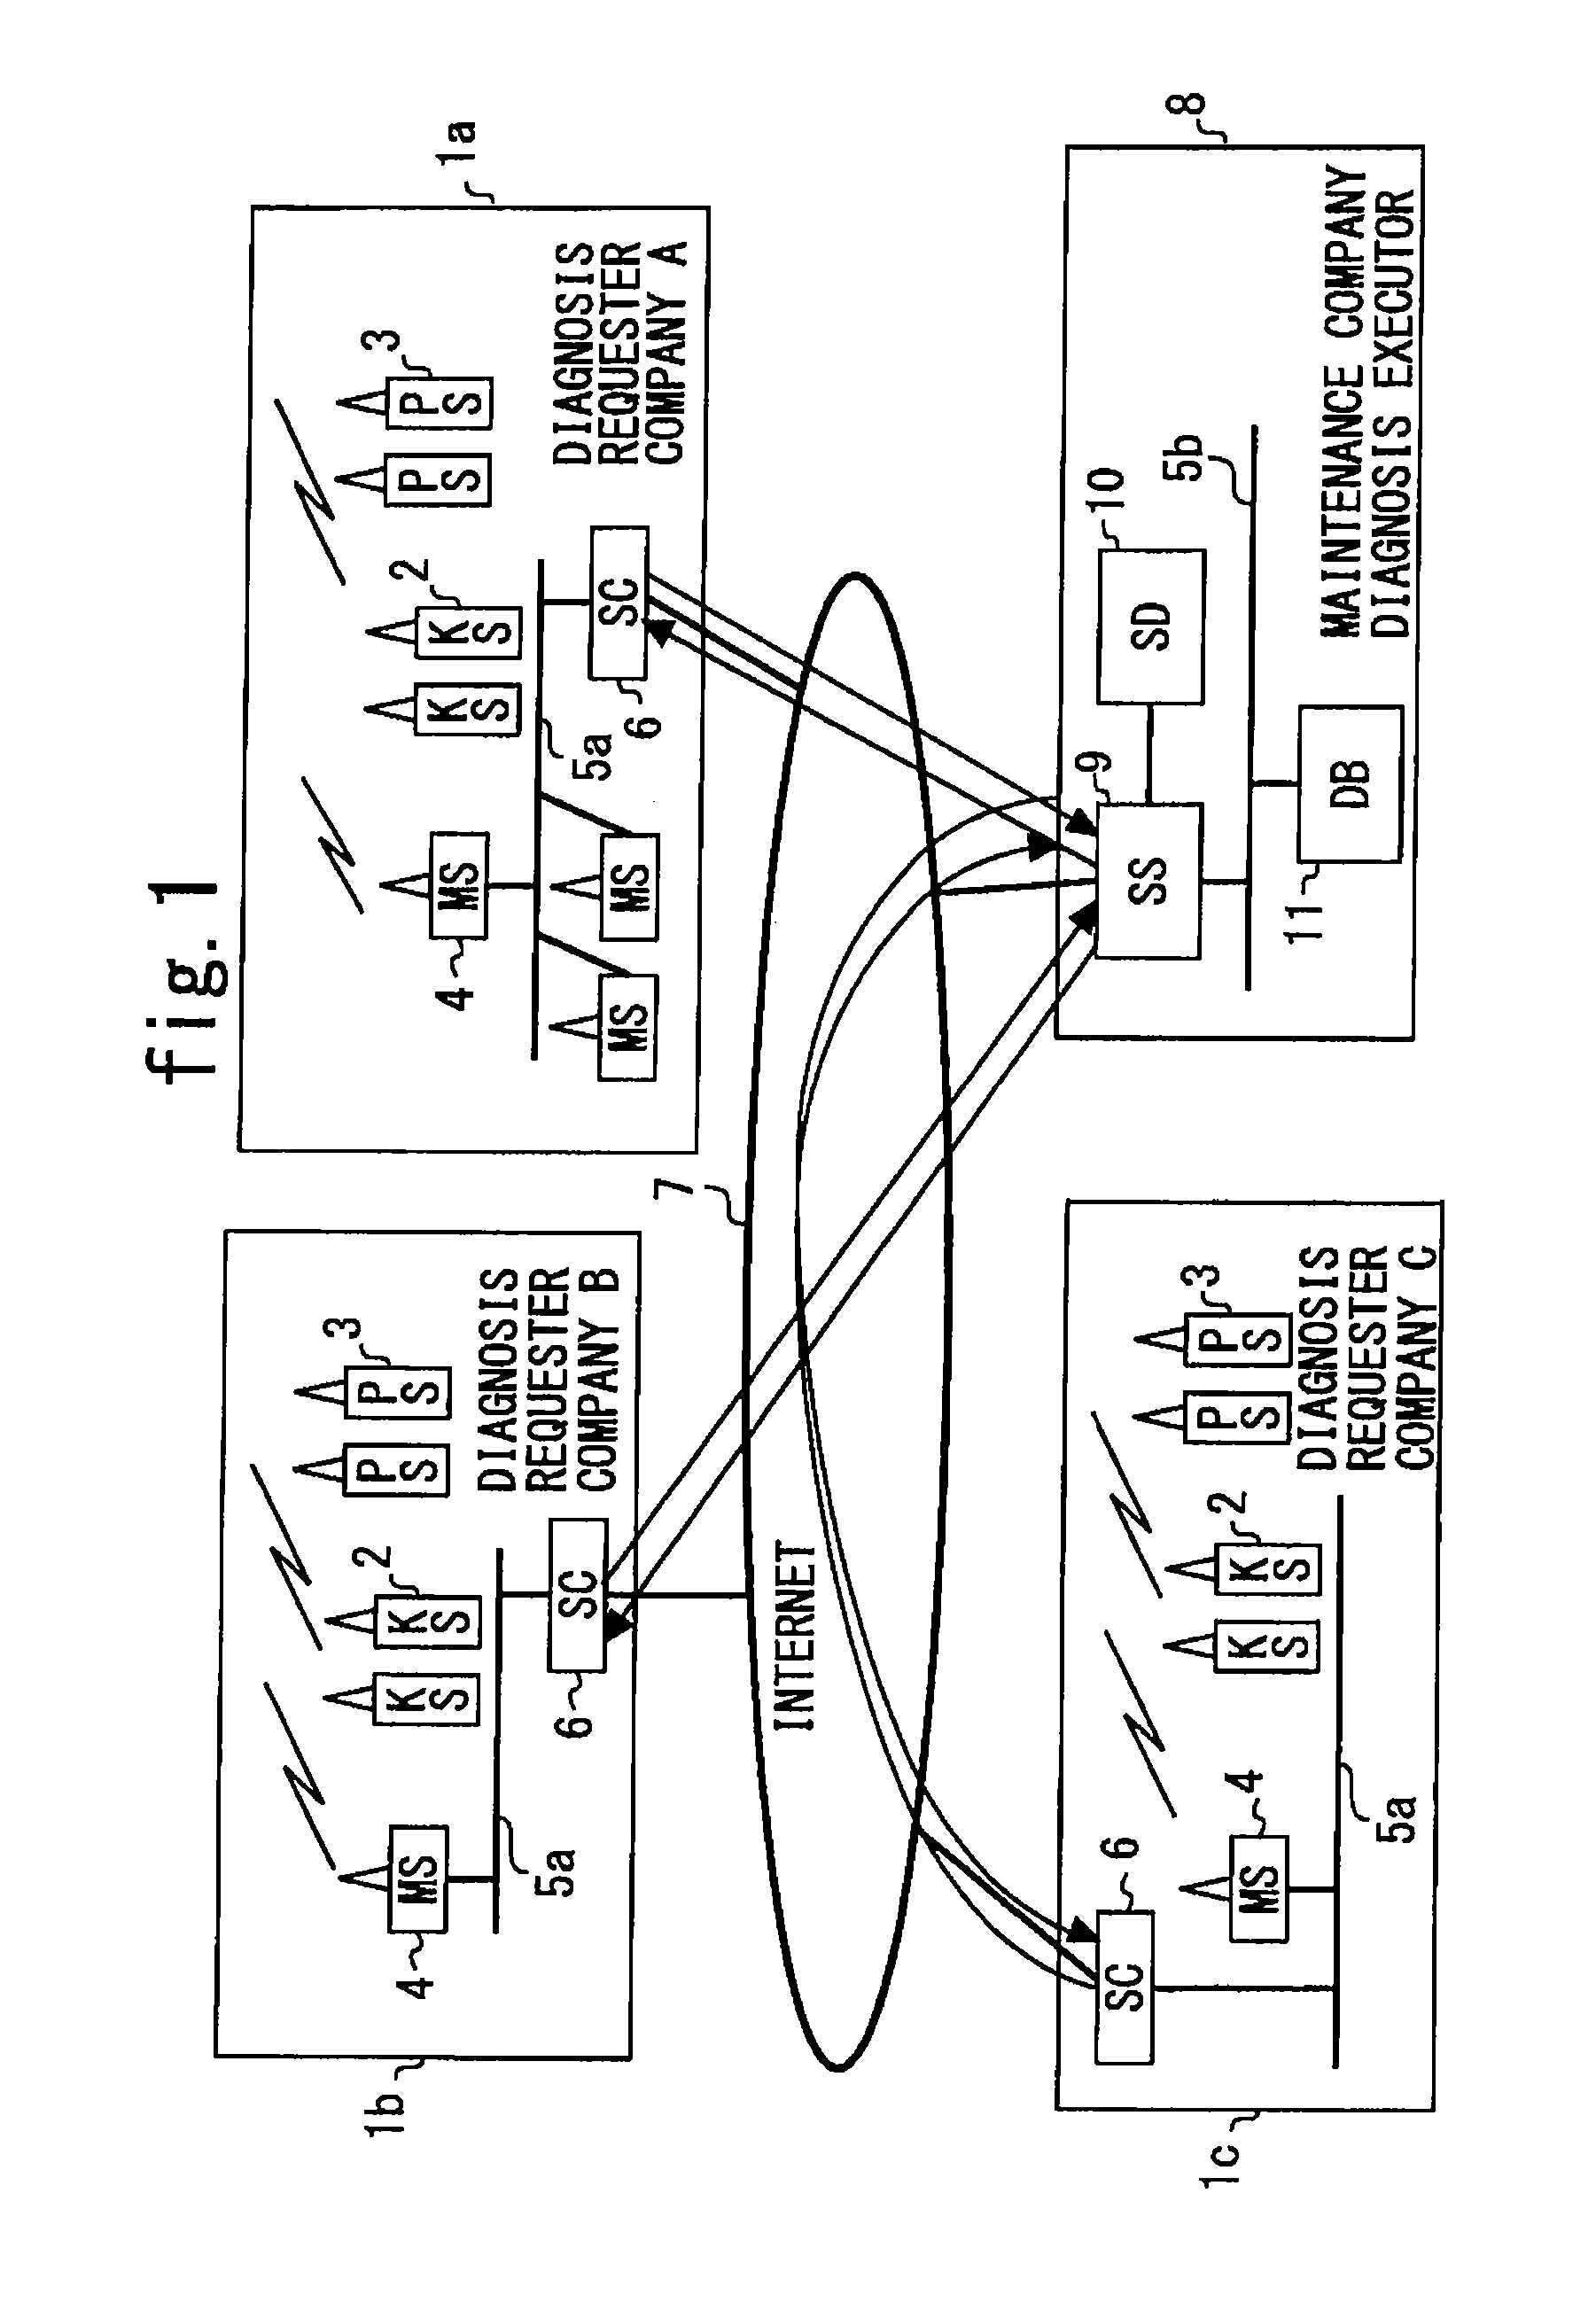 Automatic remote monitoring and diagnosis system